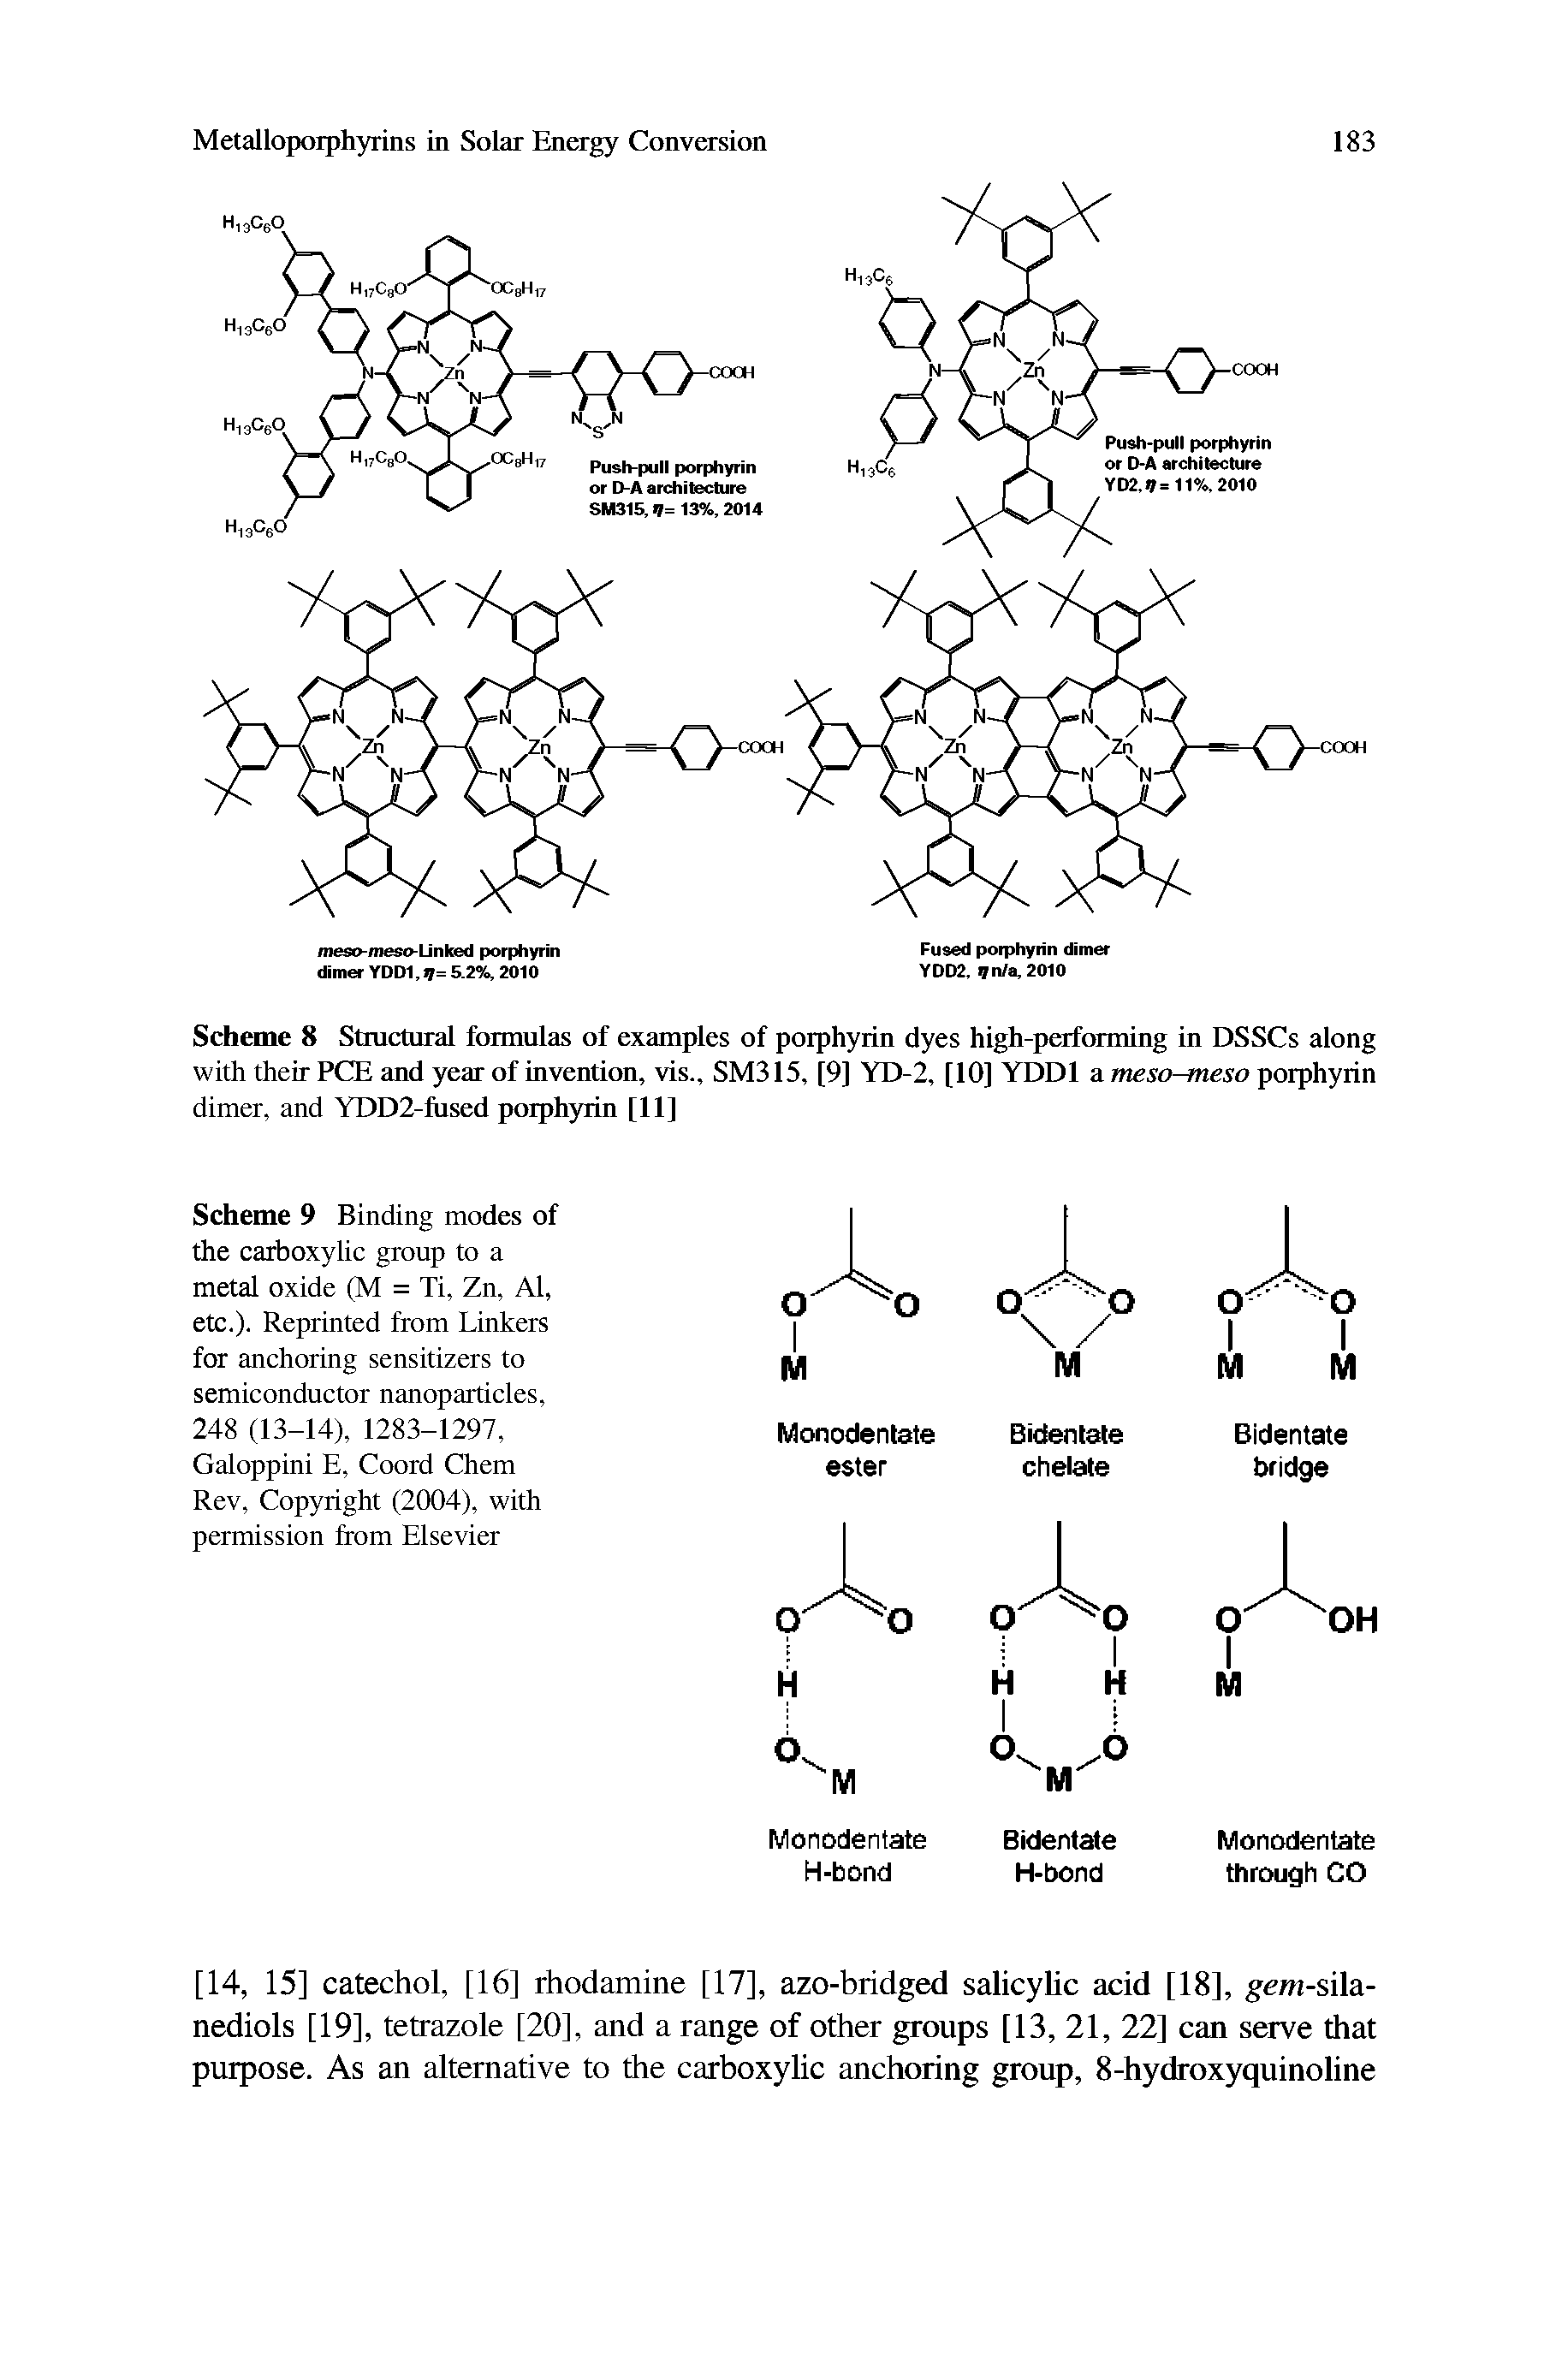 Scheme 8 Stmctural formulas of examples of porphyrin dyes high-performing in DSSCs along with their PCE and year of invention, vis., SM315, [9] YD-2, [10] YDDl a meso-meso porphyrin dimer, and YDD2-fused porphyrin [11]...